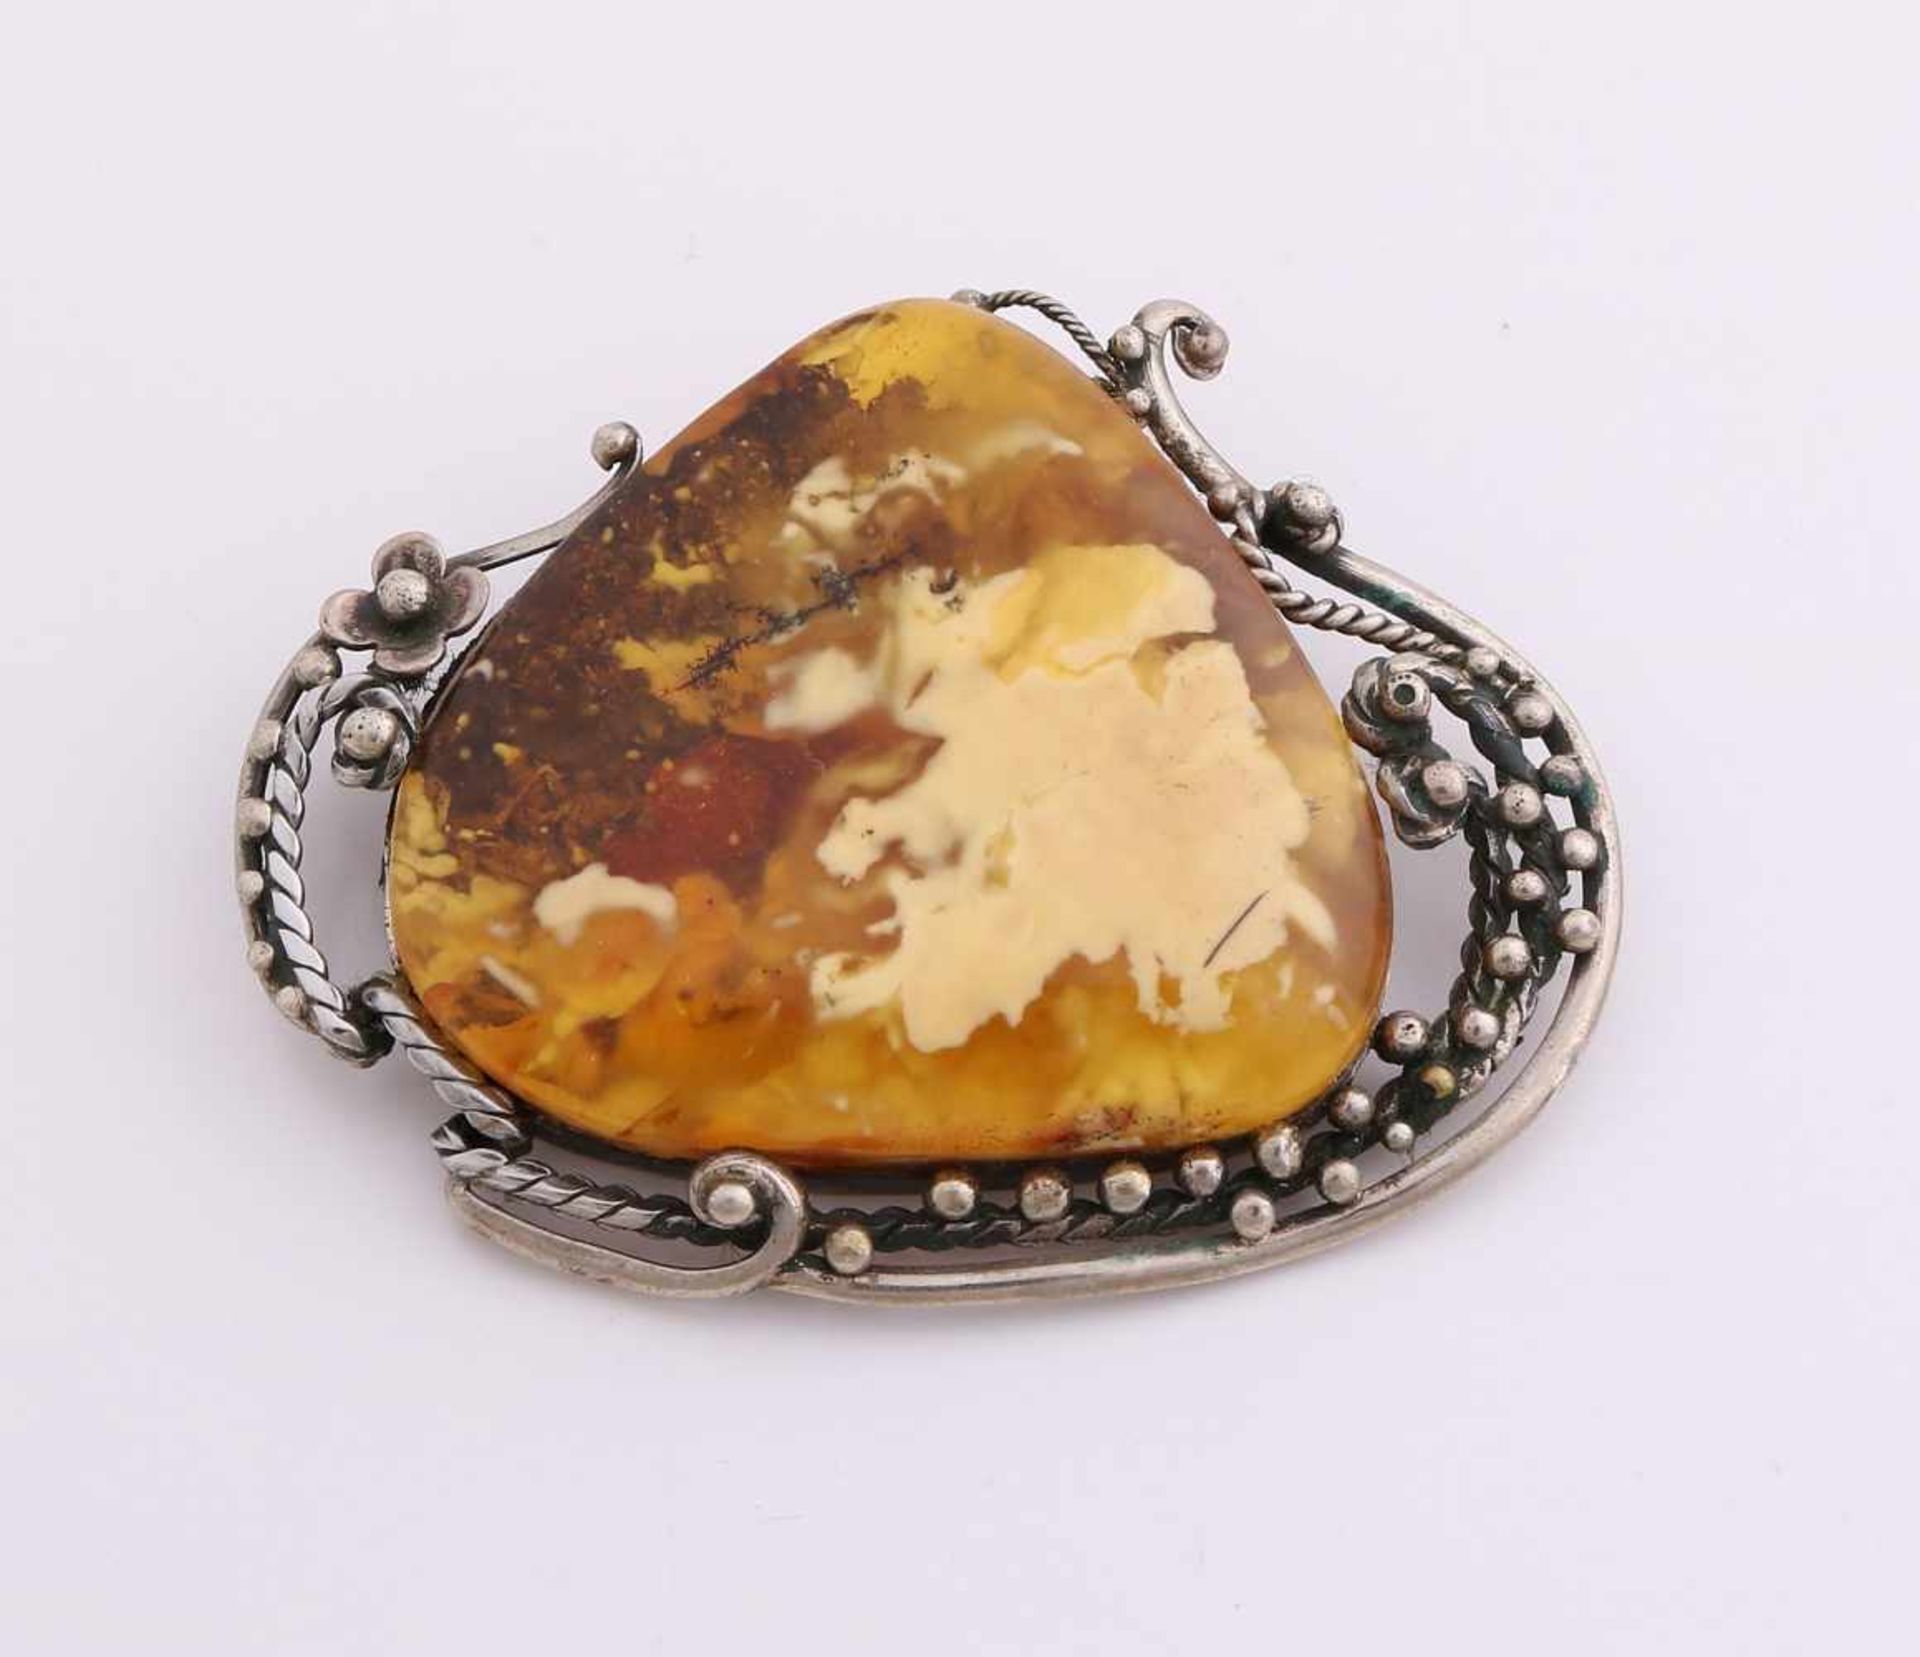 Broche with succinic white metal contained in a reaction with graining and twisted operation.